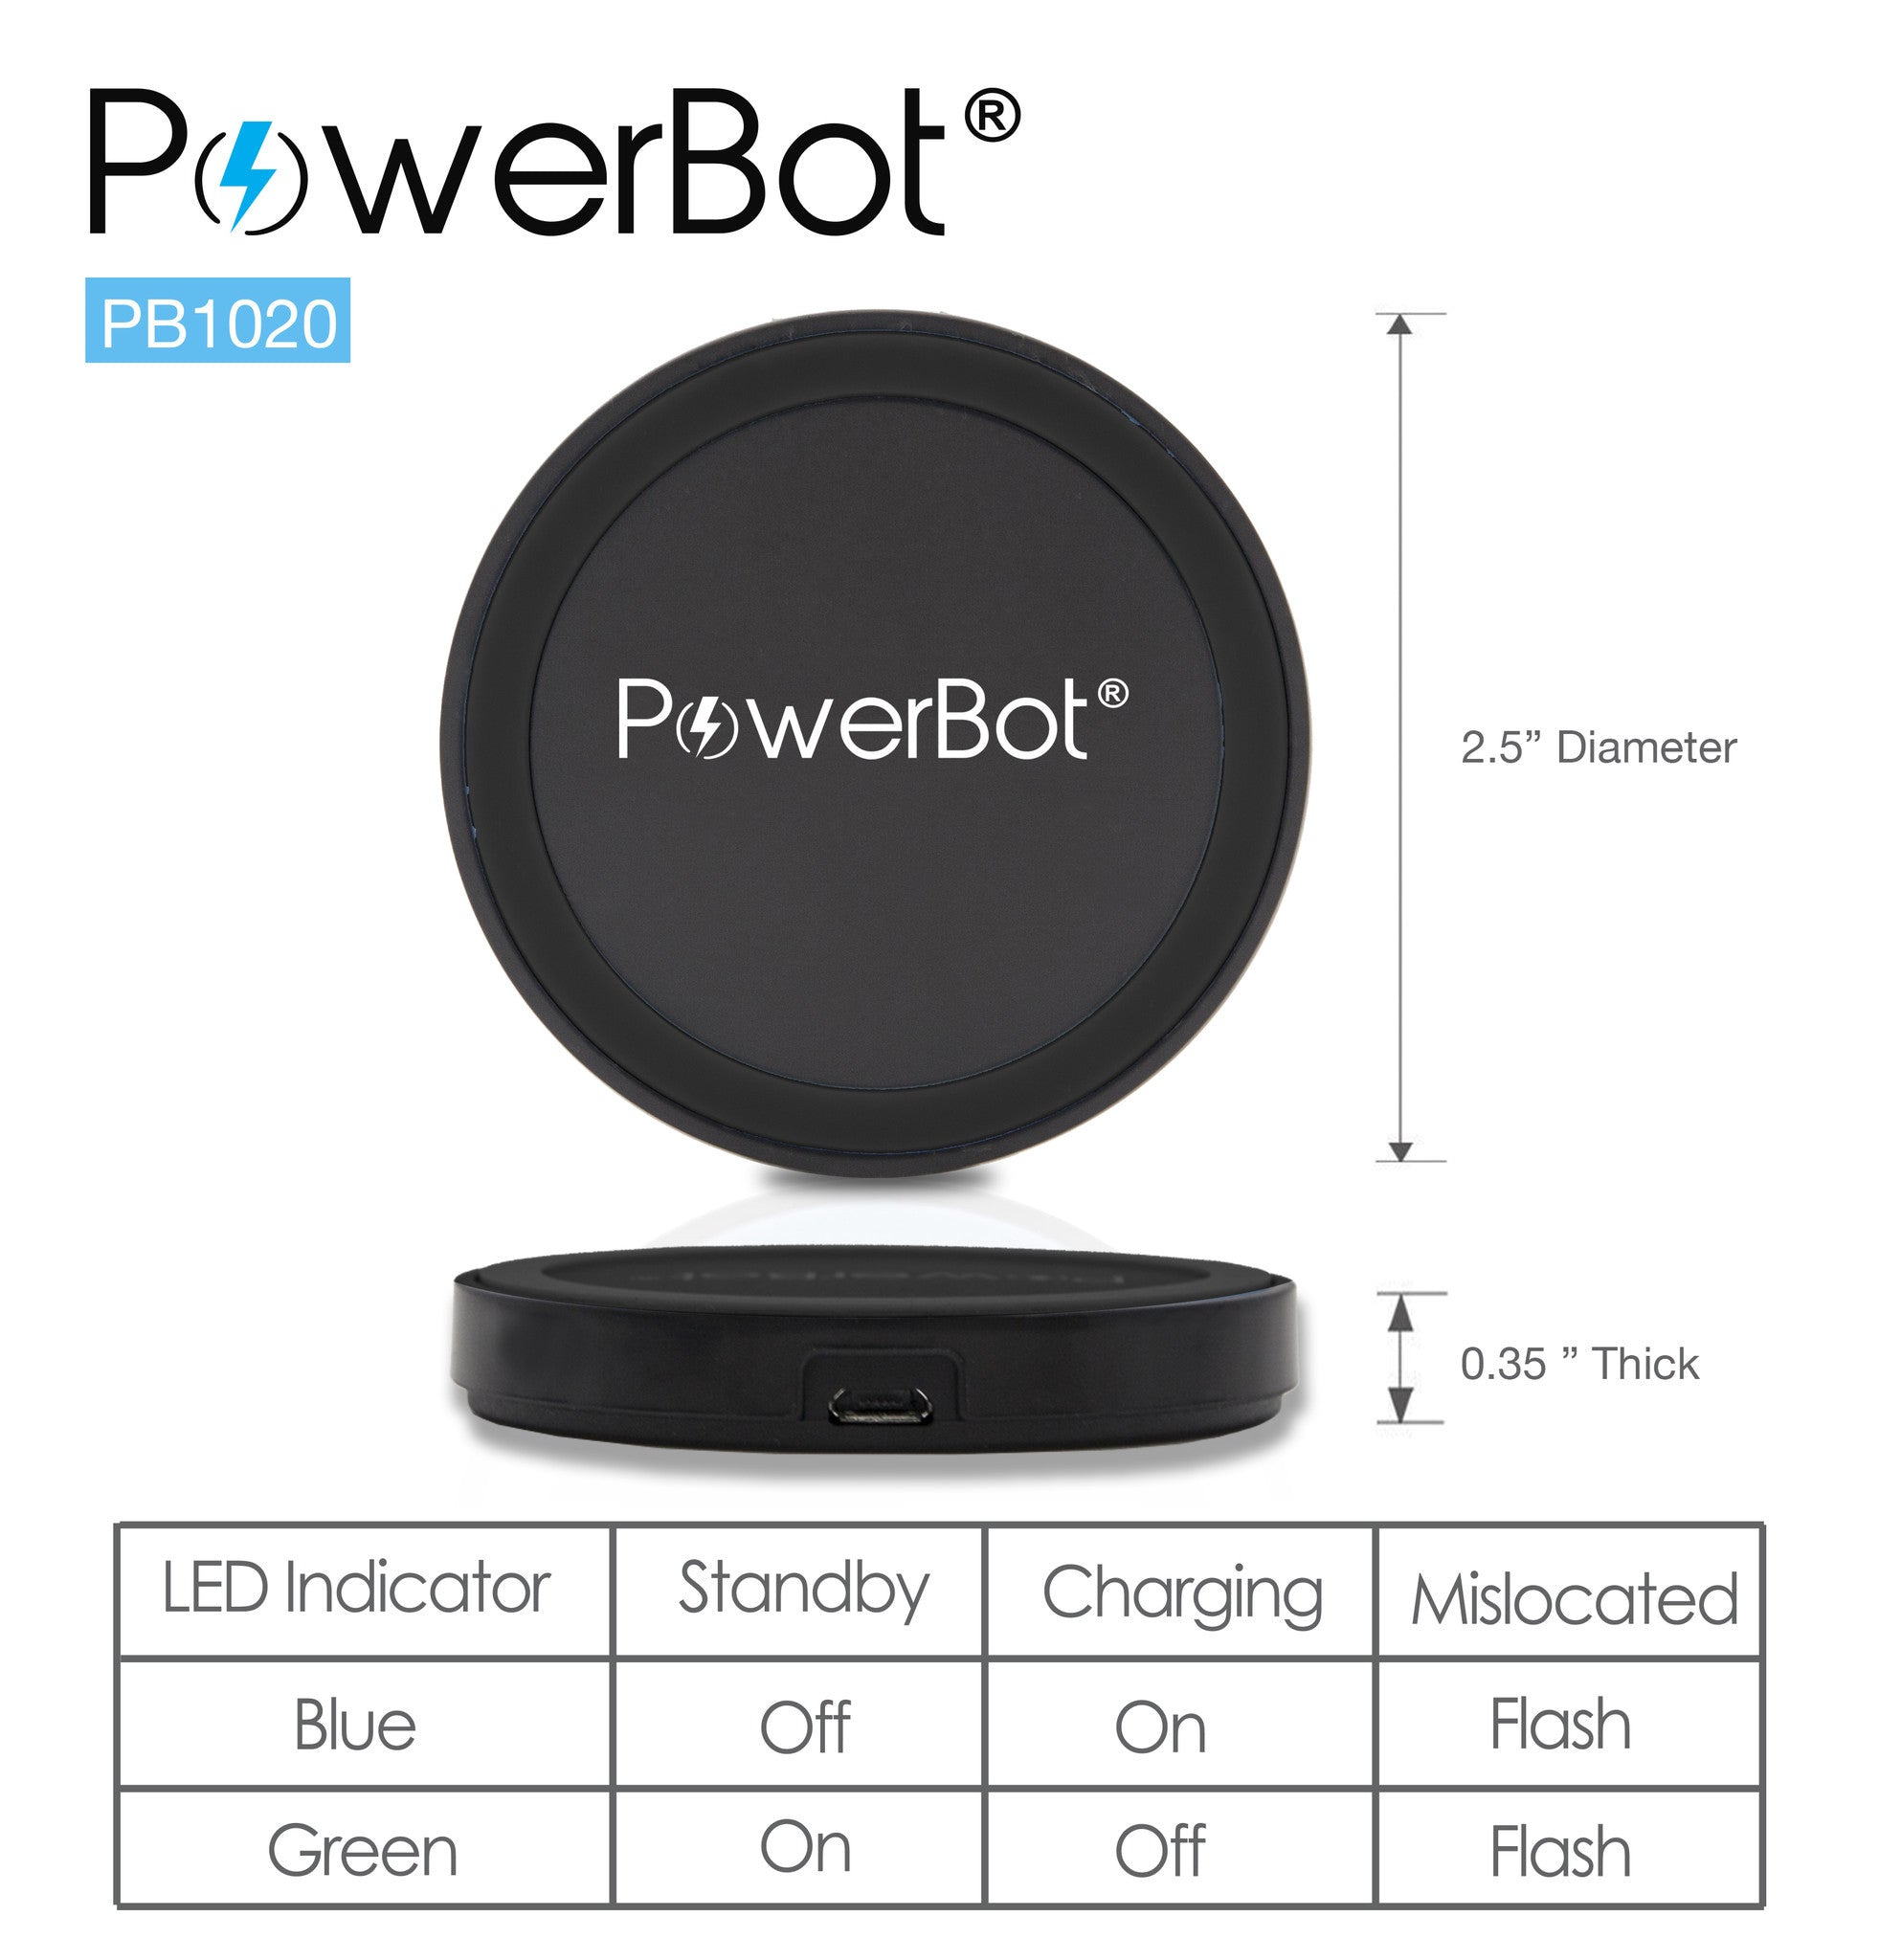 PowerBot® PB1020 Qi Charger Wireless Charge Qi-Enabled Inductive Charging Pad w/ Compliant Standard Smart LED for Samsung Galaxy Note, HTC, Nexus, Motorola Smart Watch, Smartphones, Tablets and More!